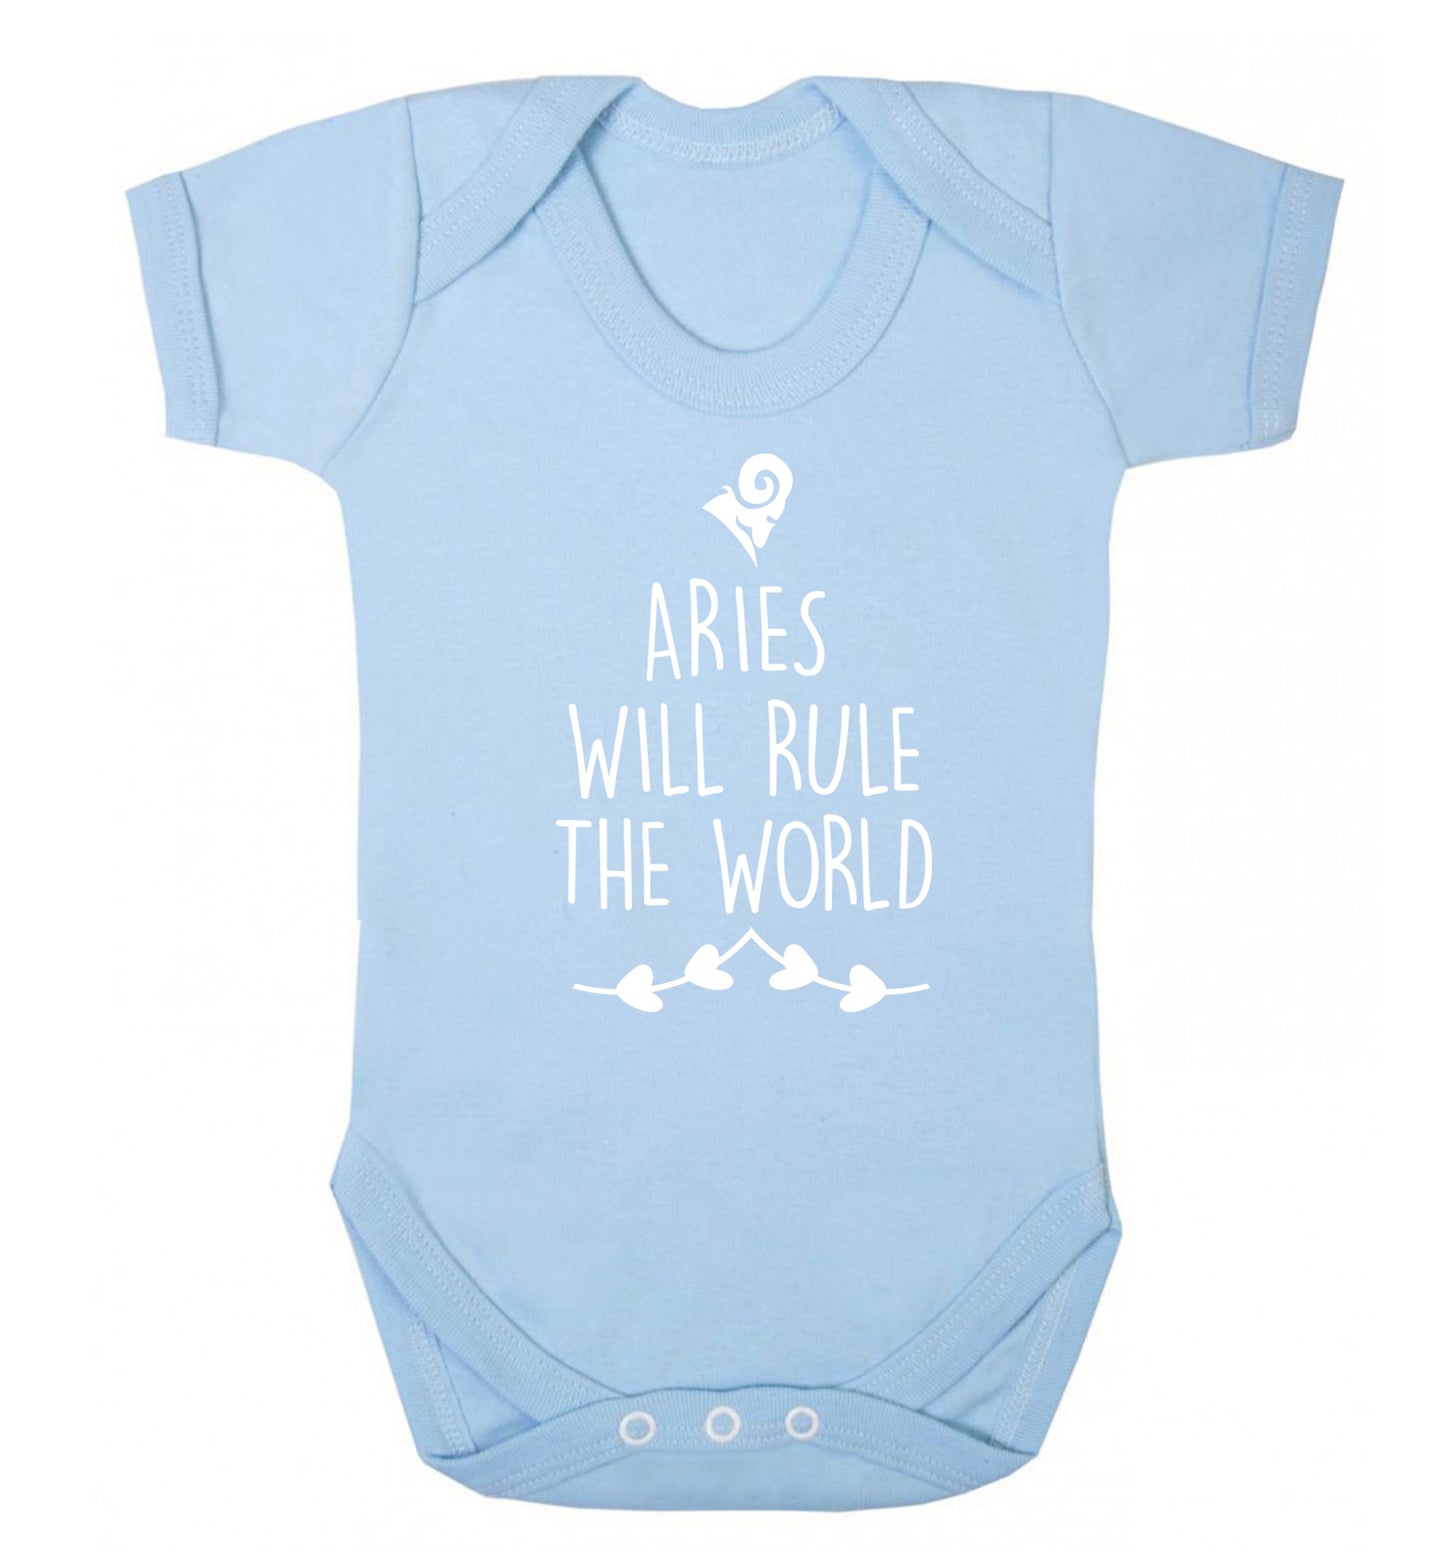 Aries will rule the world Baby Vest pale blue 18-24 months